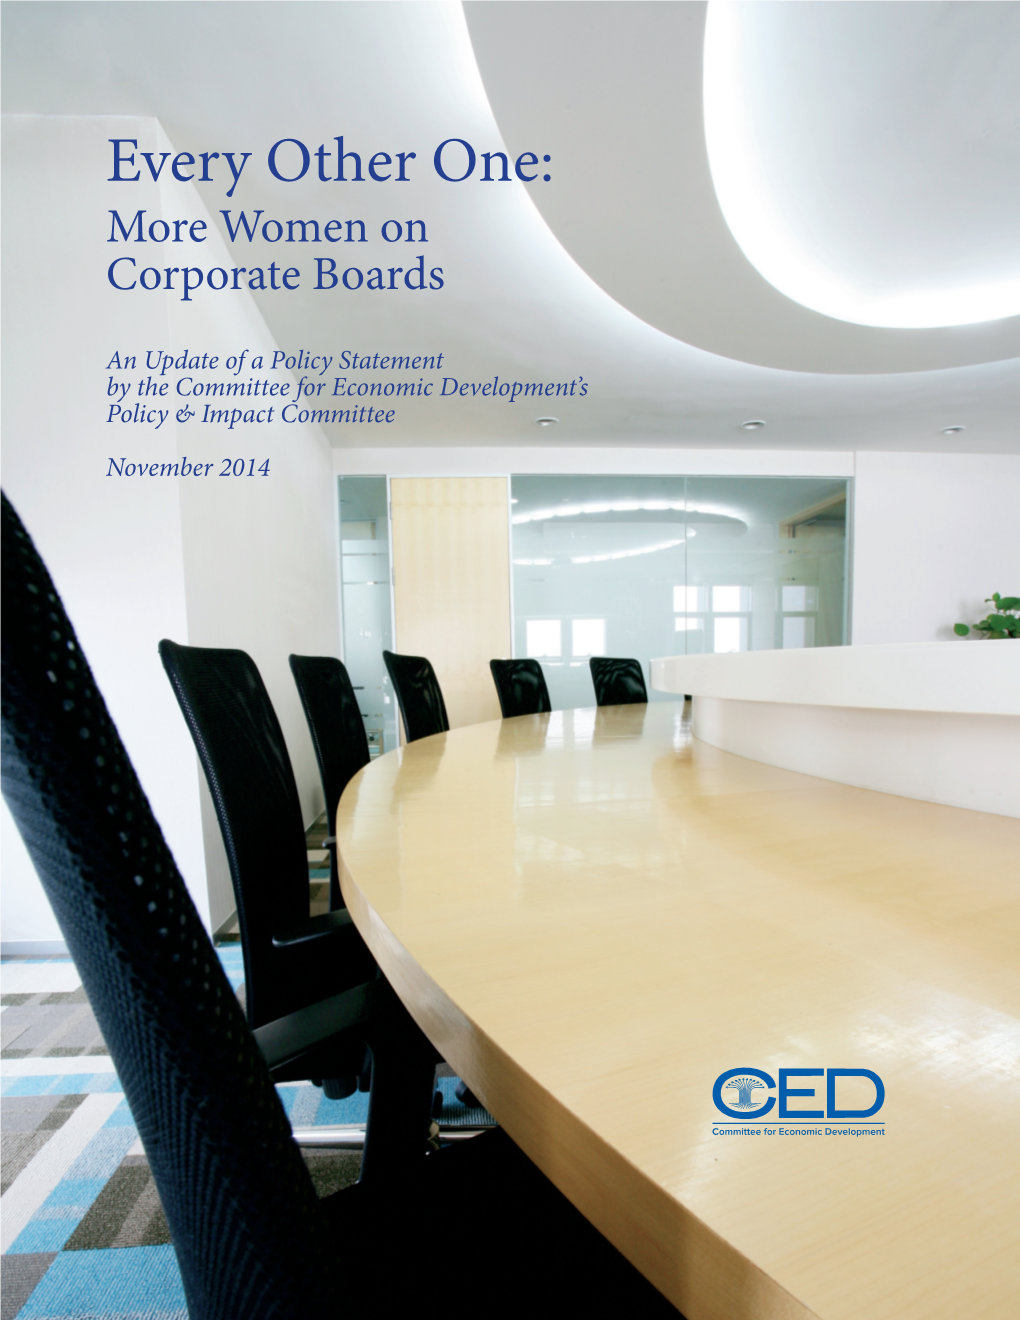 Every Other One: More Women on Corporate Boards